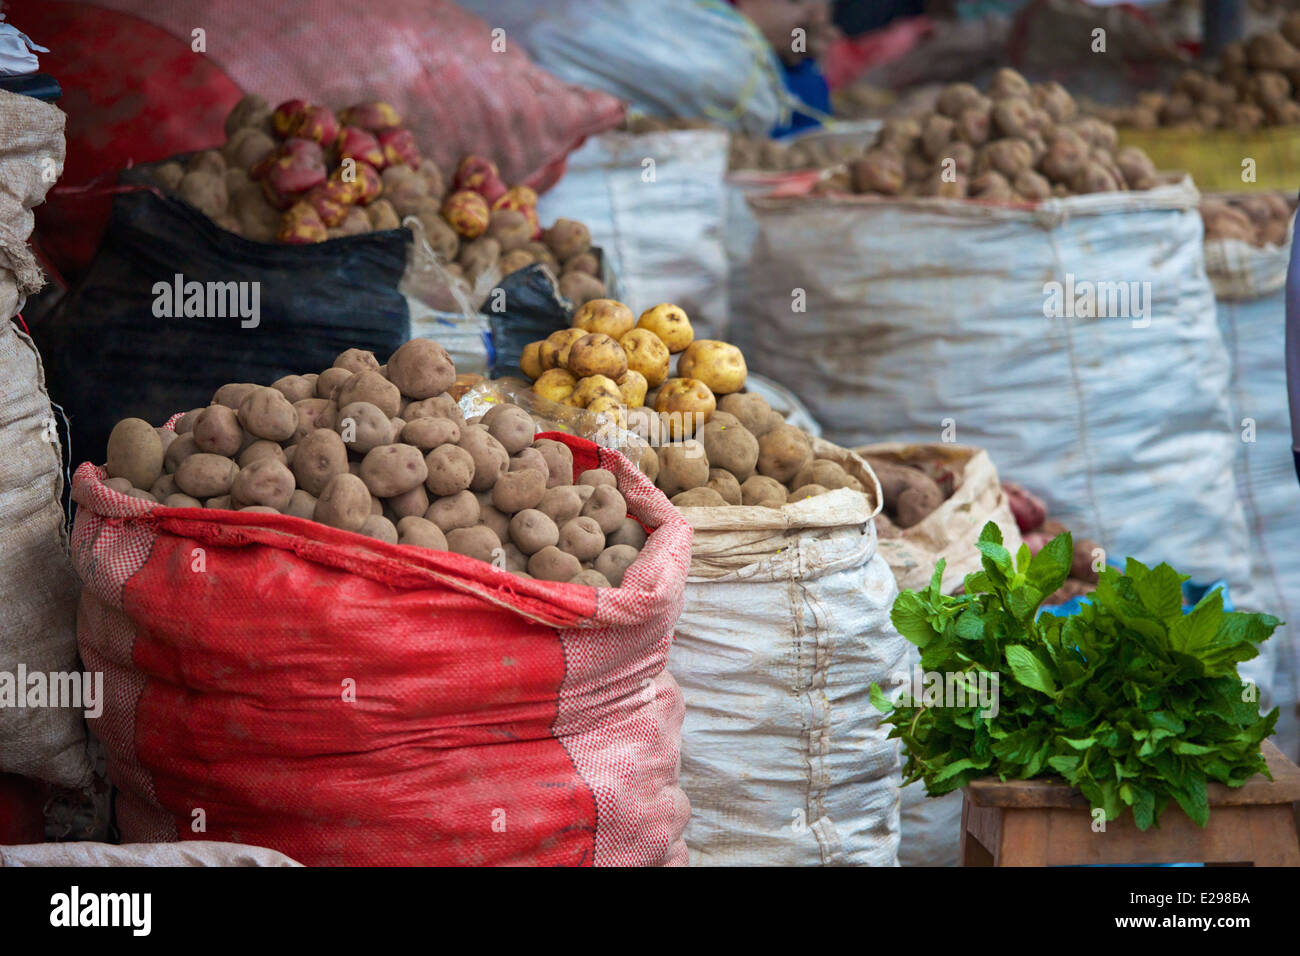 Produce and potatoes for sale at the vegetable market in Cusco, Peru, the ancient seat of the Inca Empire high in the Andes. Stock Photo